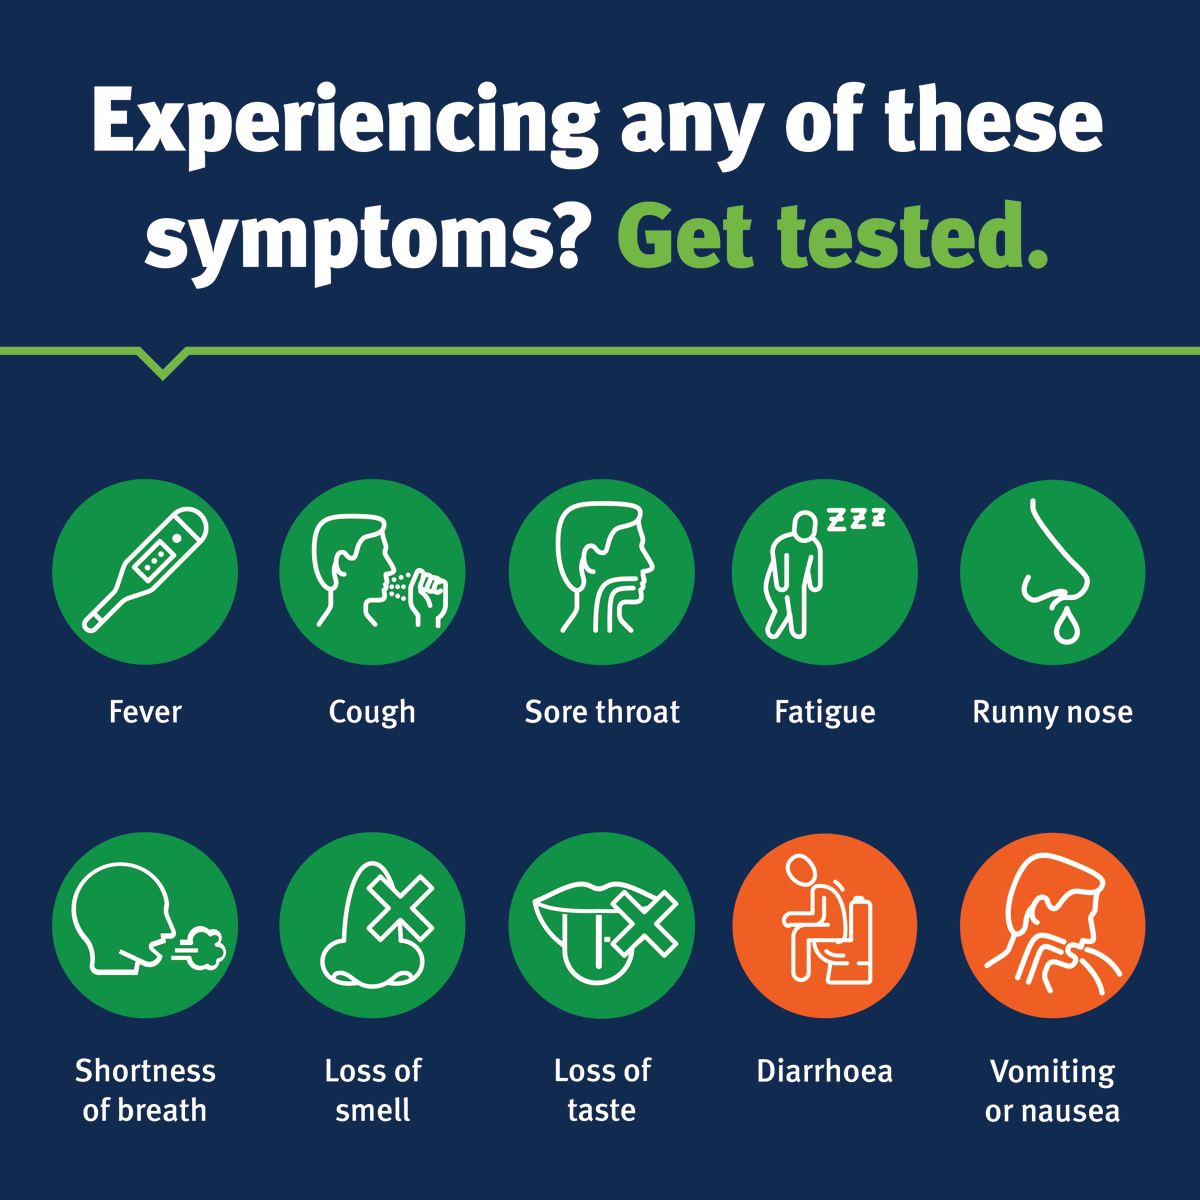 Queensland Health On Twitter Hey Queensland We Ve Added Two Additional Symptoms To The Covid 19 Symptoms List If You Re Experiencing Any Of The Symptoms Listed Below Come Forward Get Tested For Covid 19